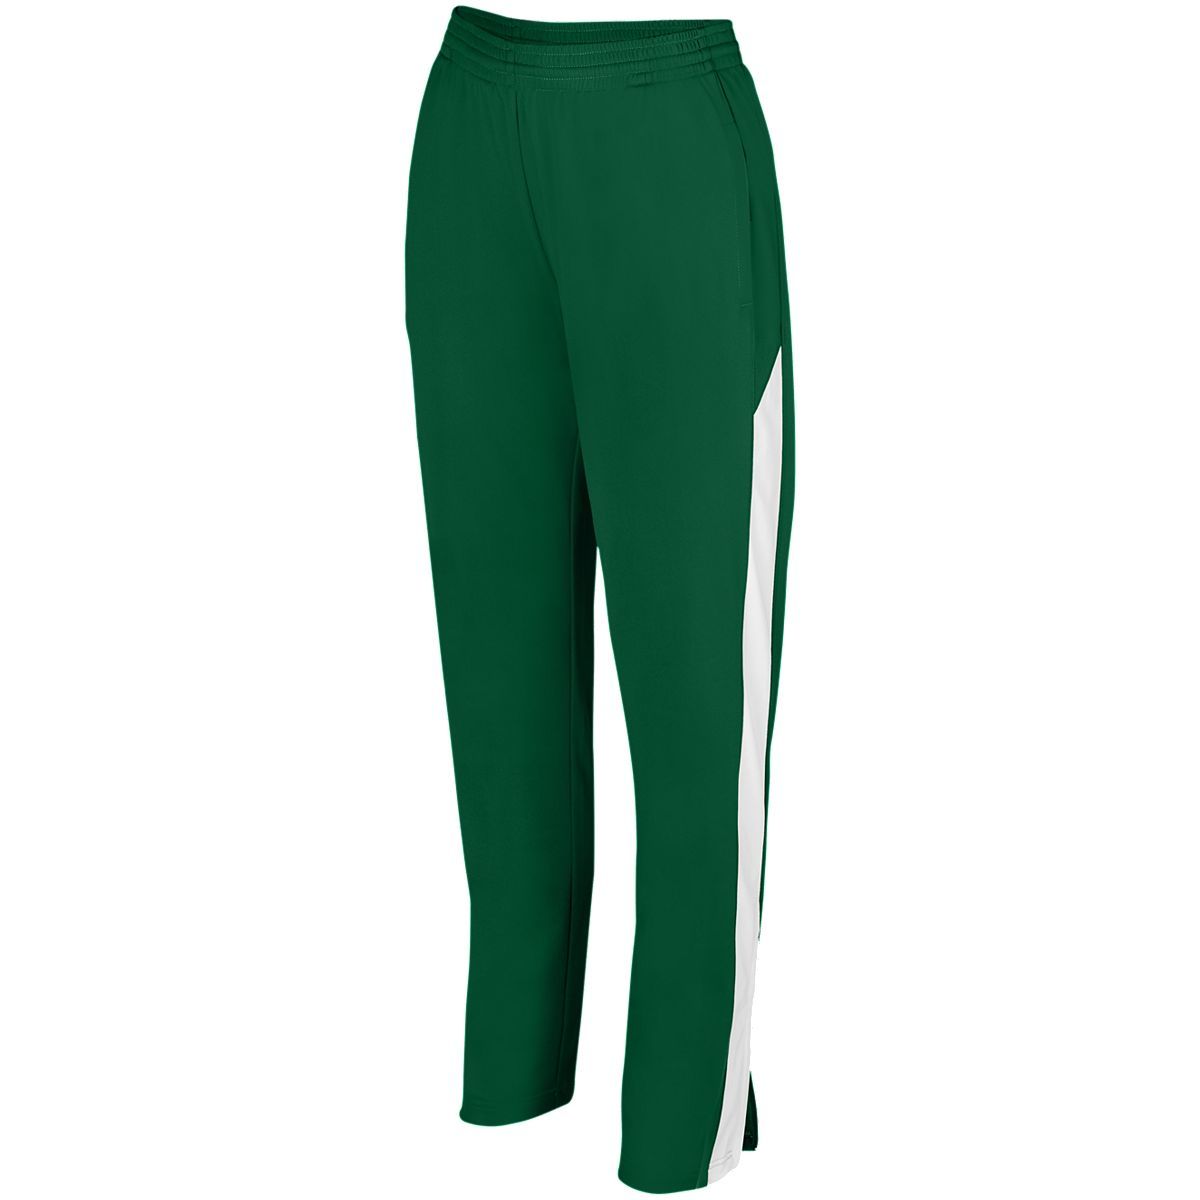 Augusta Sportswear Ladies Medalist Pant 2.0 in Dark Green/White  -Part of the Ladies, Ladies-Pants, Pants, Augusta-Products product lines at KanaleyCreations.com